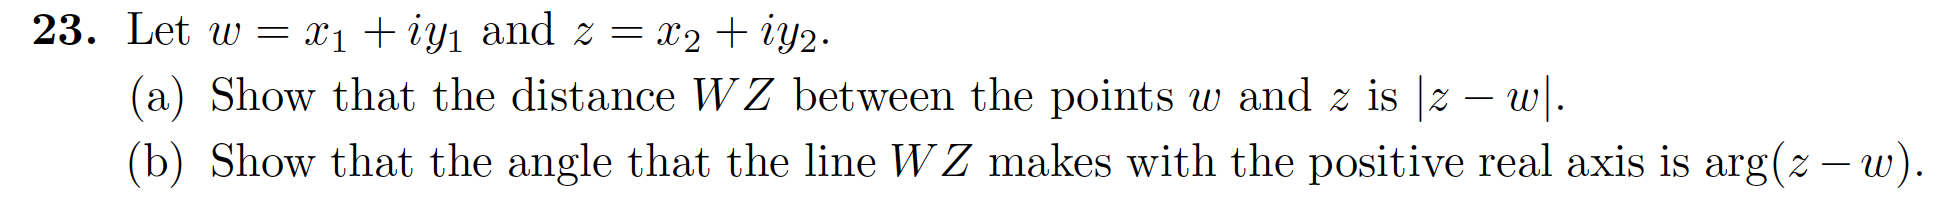 23. Let W =
X2iy2
C1iy1 and z =
a) Show that the distance WZ between the points w and z is z - w.
(b) Show that the angle that the line WZ makes with the positive real axis is arg(z - w).
